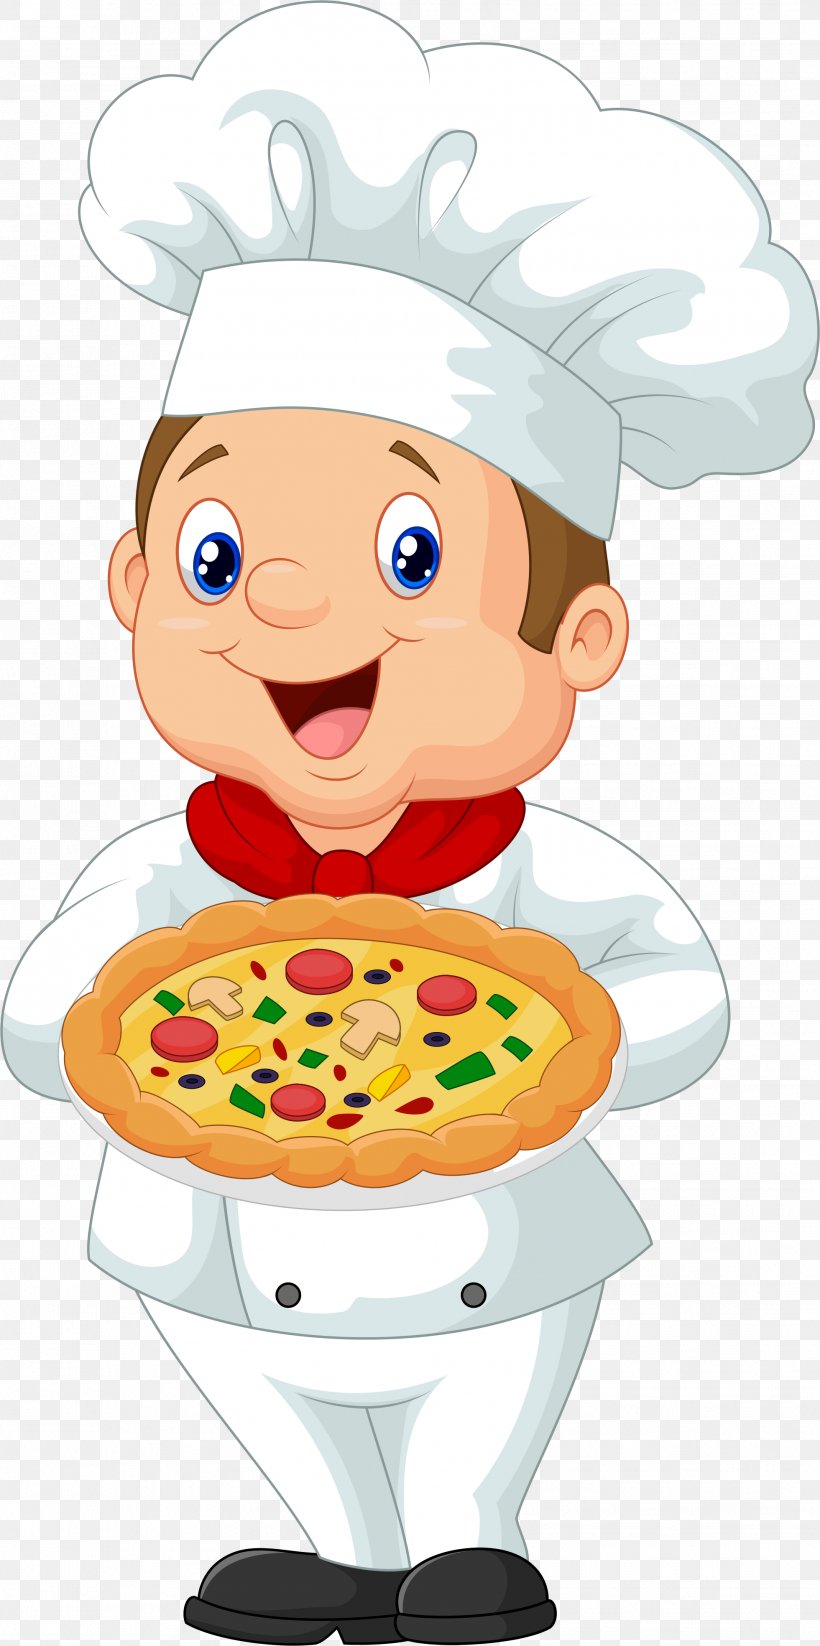 Bakery Cook Pizza Clip Art, PNG, 1961x3938px, Bakery, Animaatio, Art, Baker, Baking Download Free